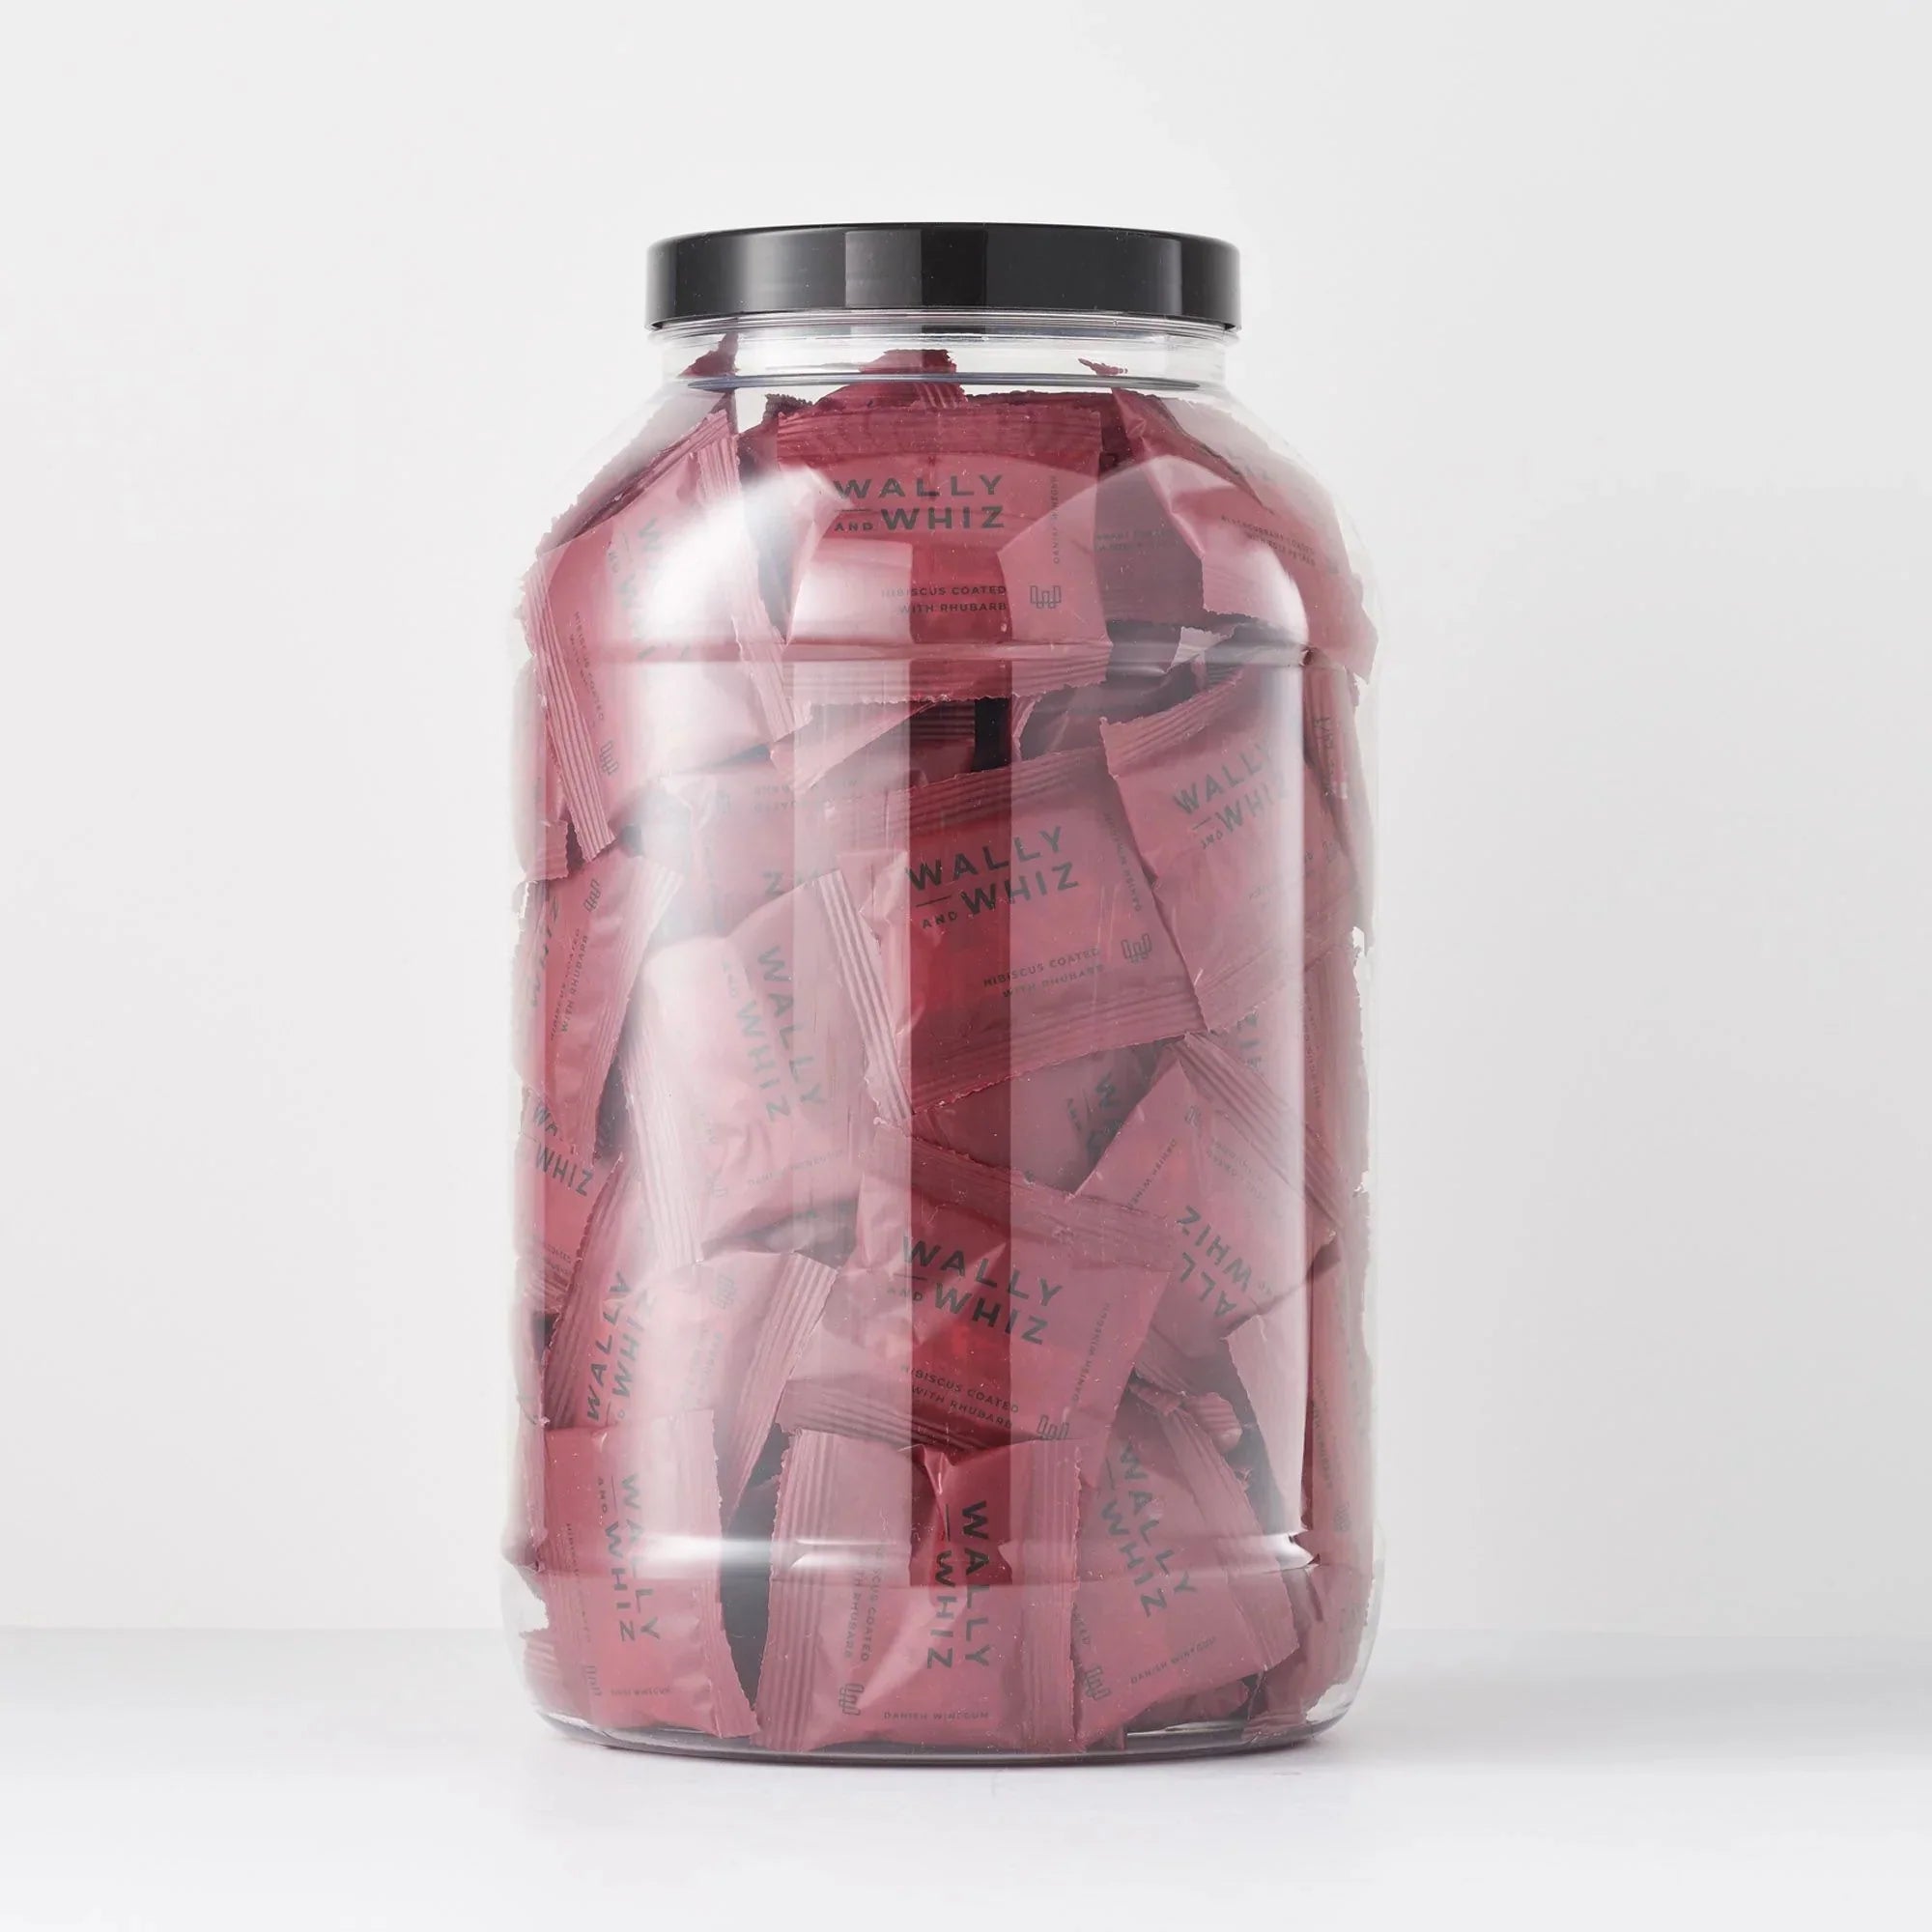 Wally And Whiz Wine Gum Jar With 125 Flowpacks, Hibiscus With Rhubarb